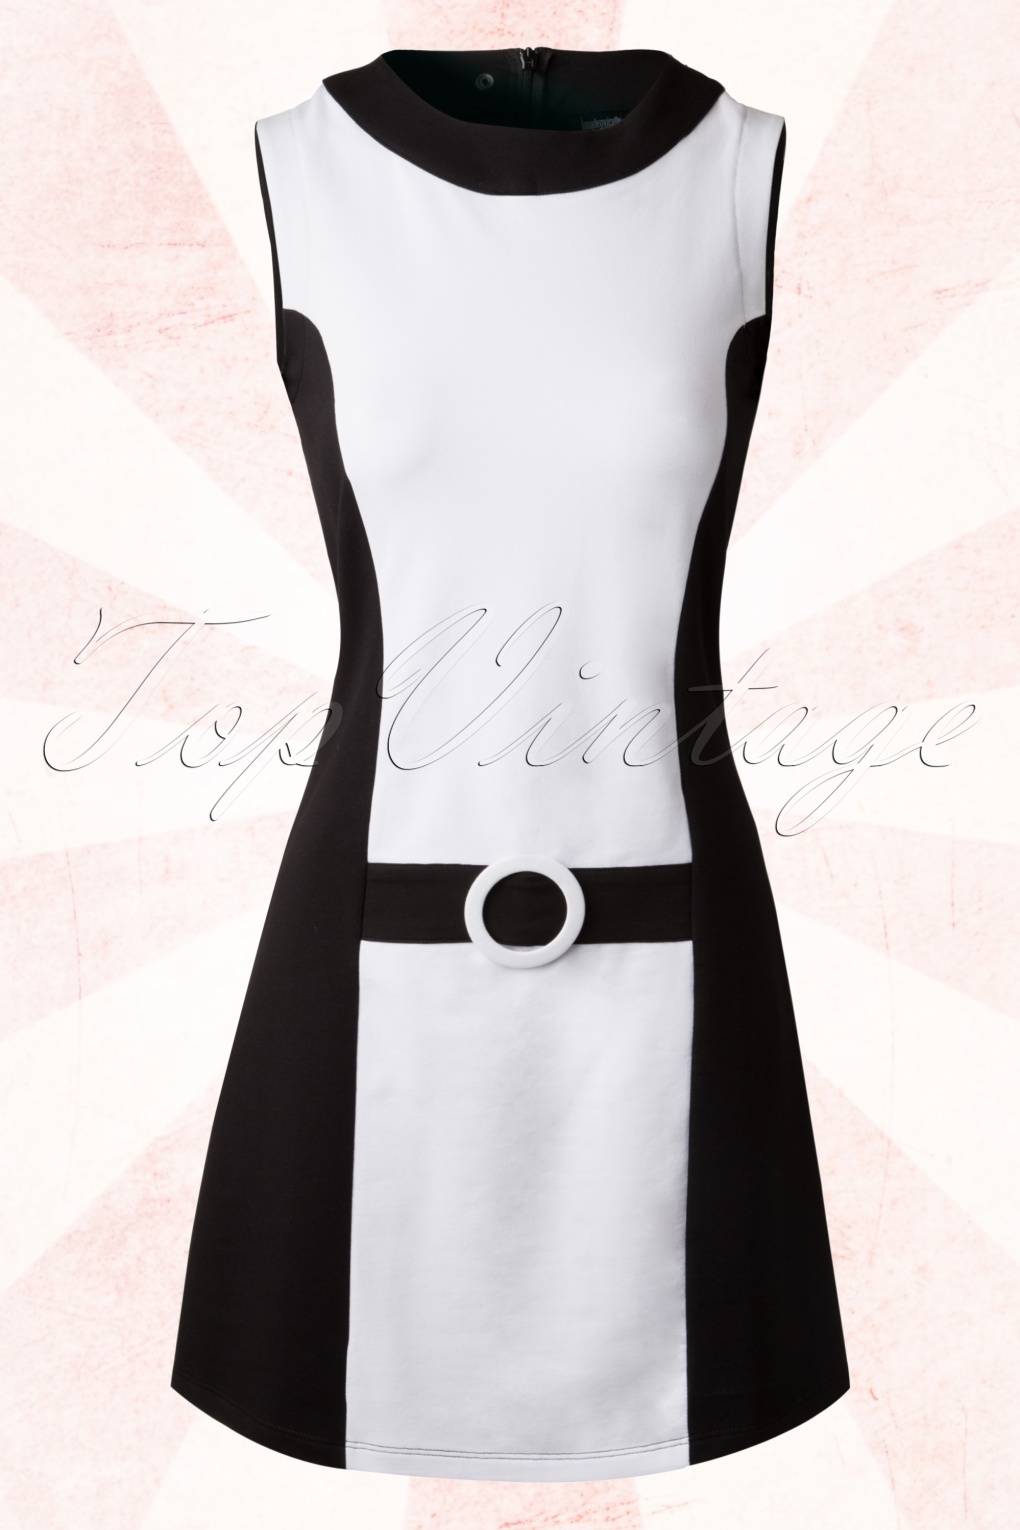 60s Cherry Jersey Dress in Black and White